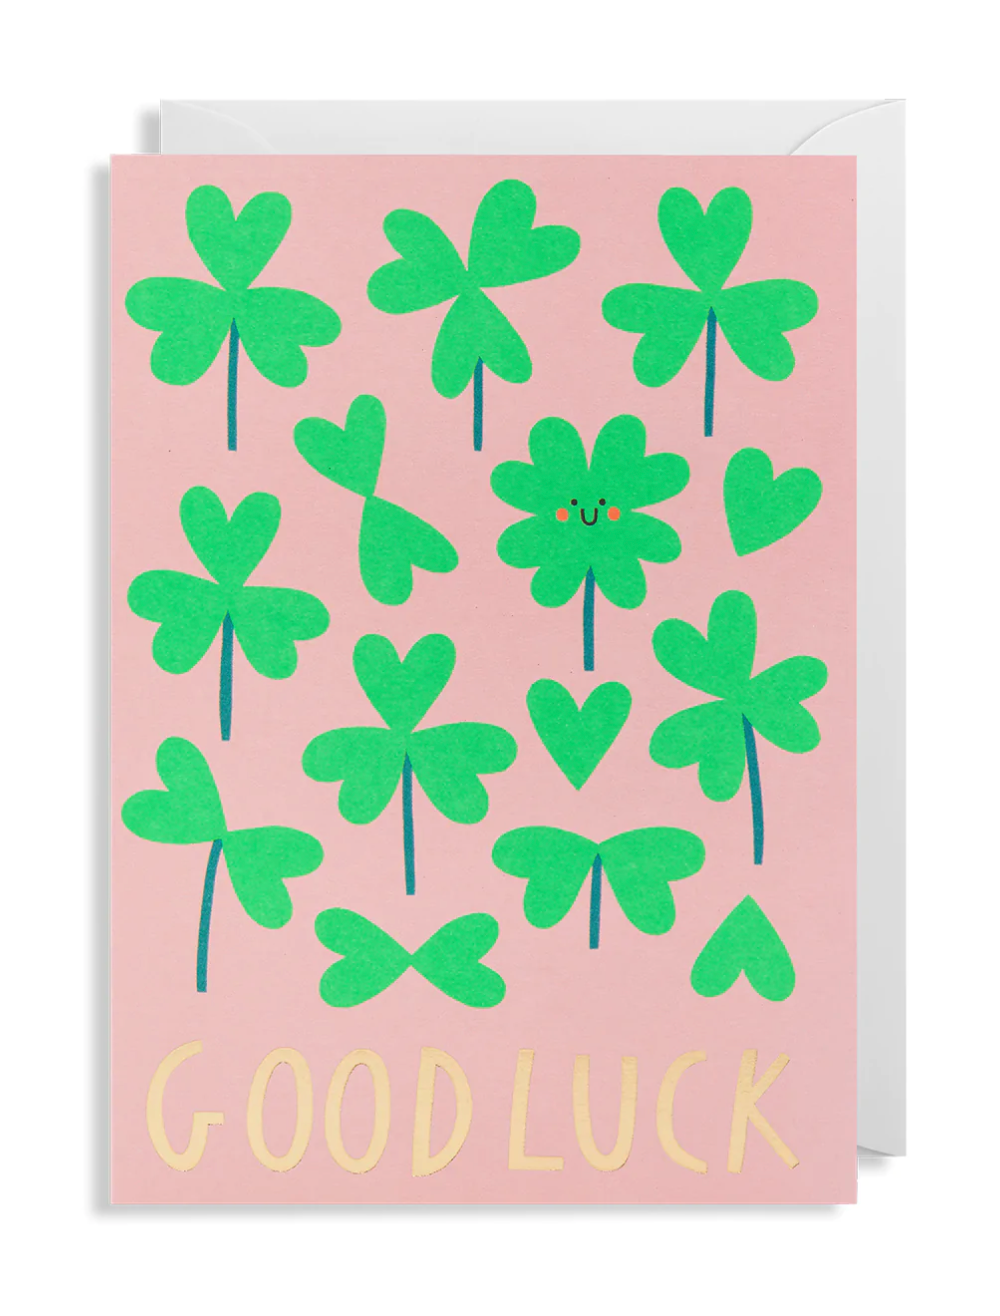 A Good Luck card in pink with lots of green shamrocks and the word s Good Luck in gold.